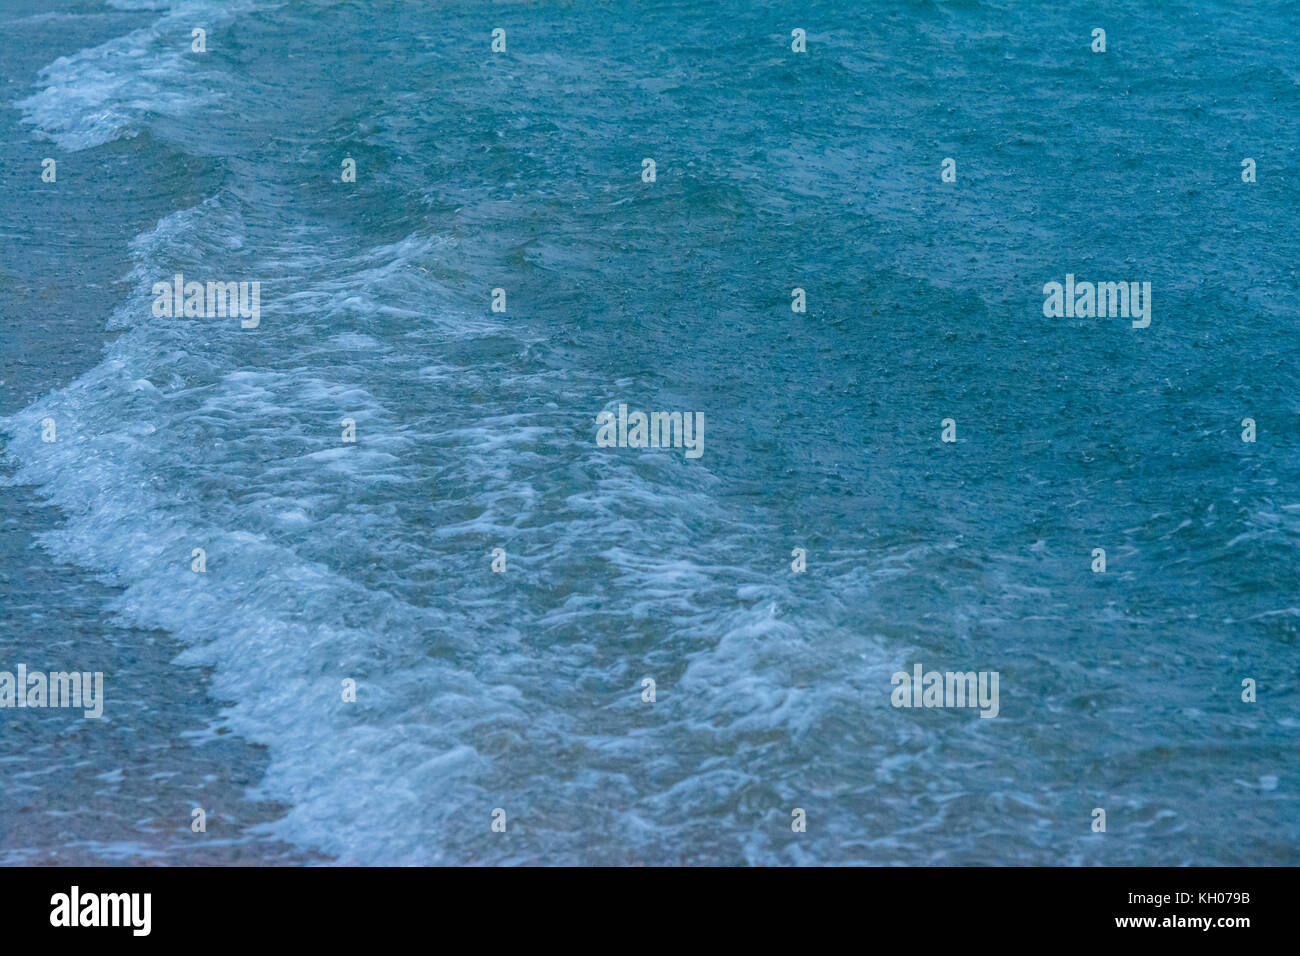 large raindrops falling on the sea during a strong thunderstorm on the Mediterranean Sea Stock Photo